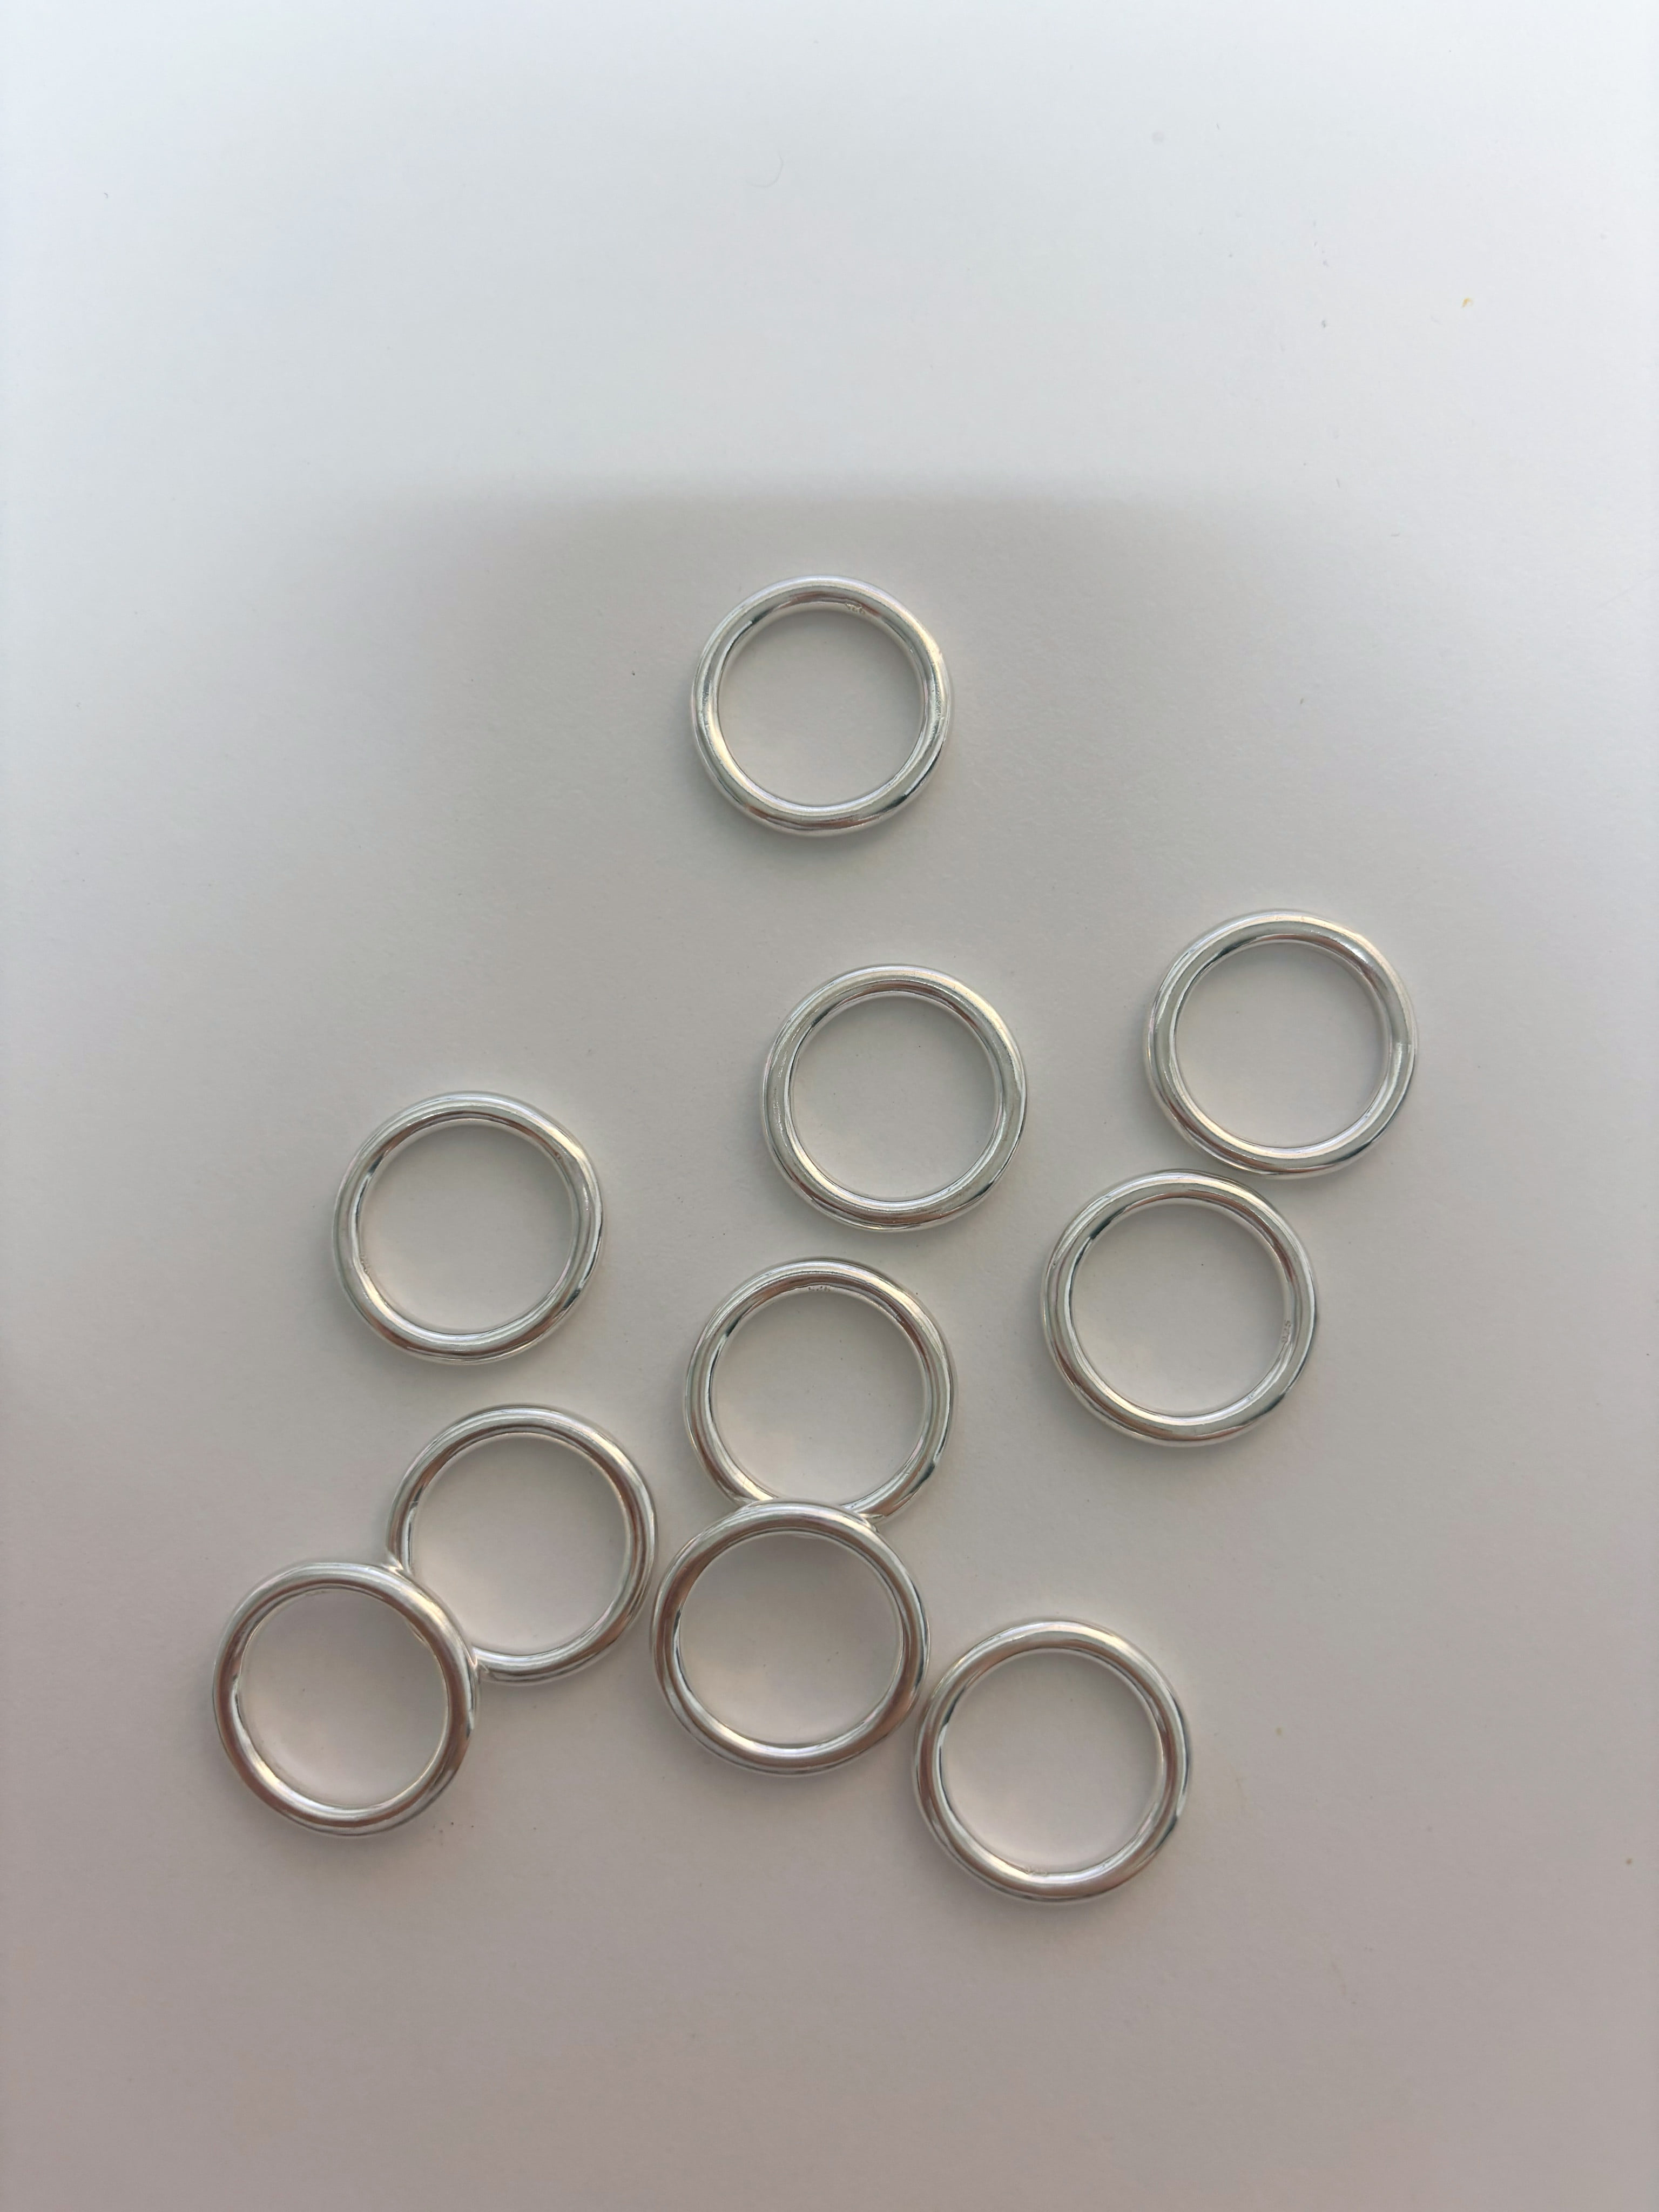 3mm 92.5 silver ring